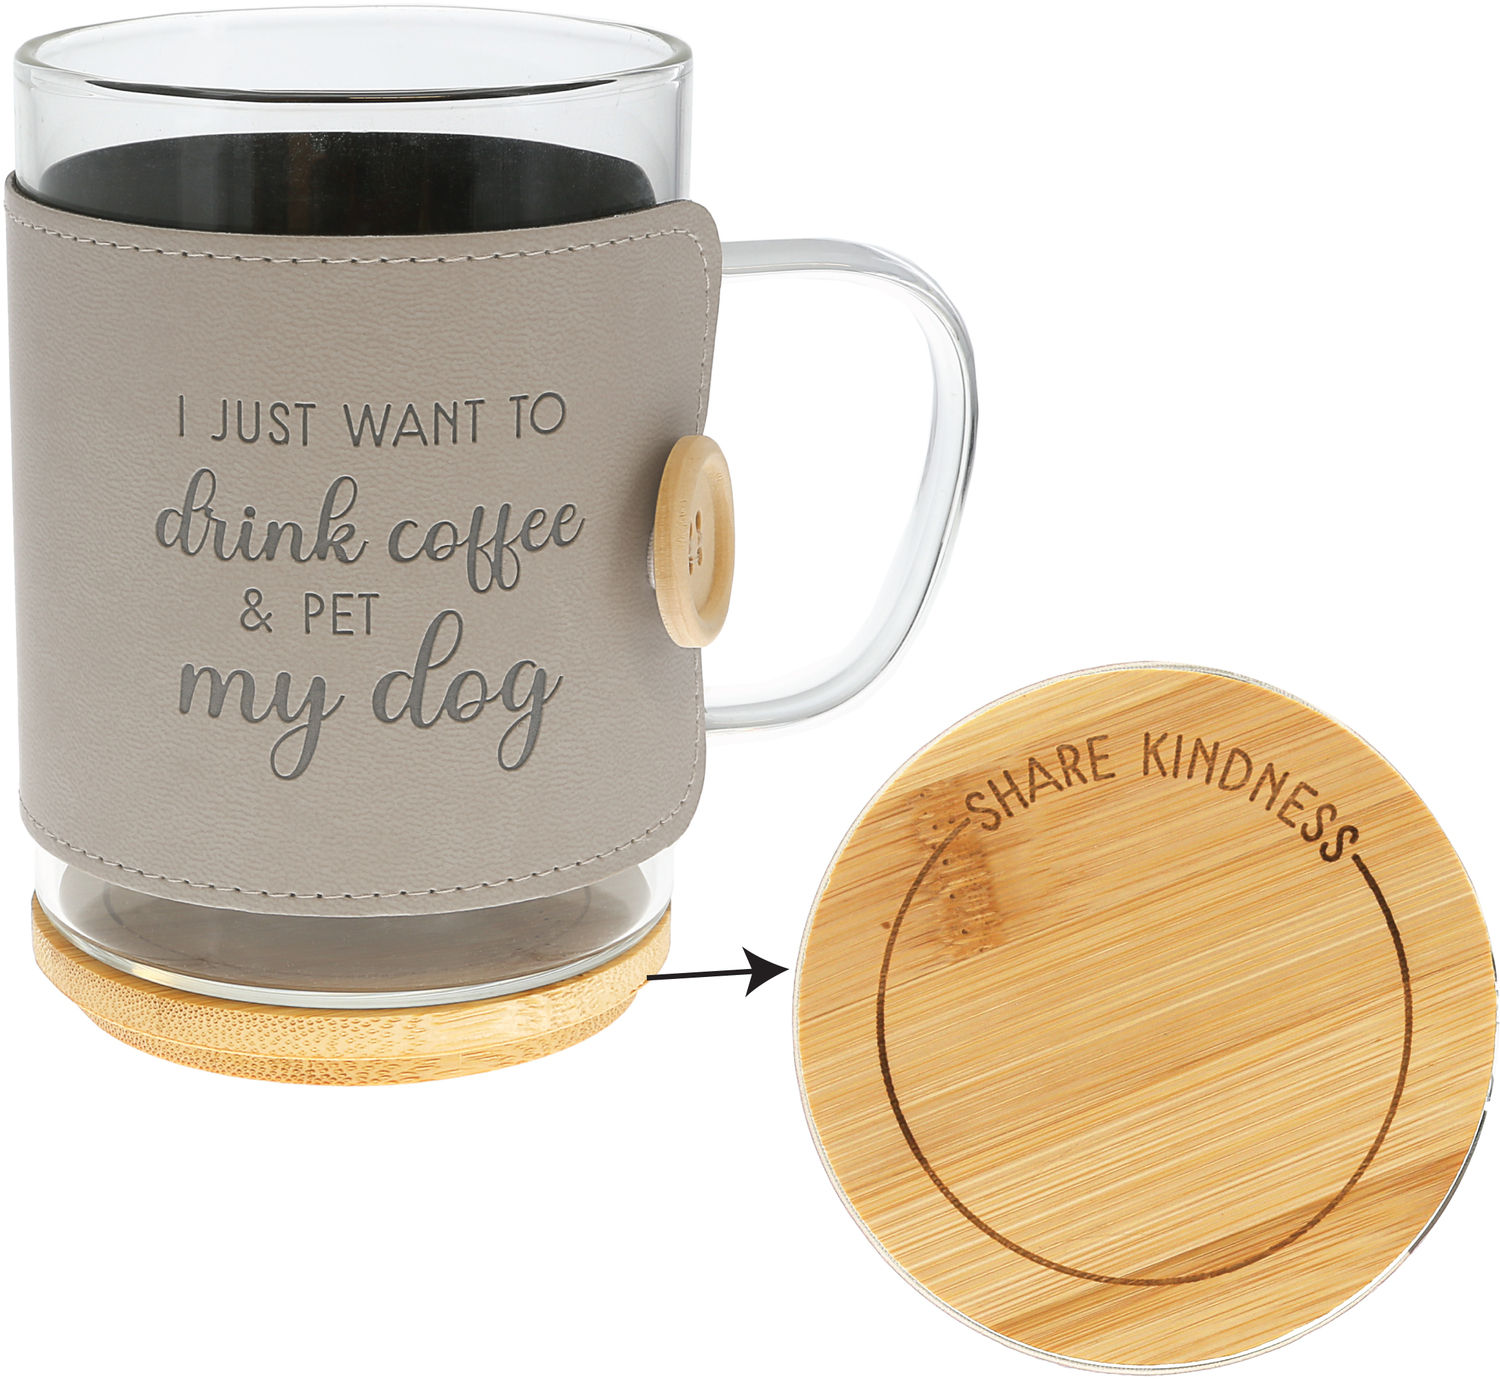 My Dog by Wrapped in Kindness - My Dog - 16 oz Wrapped Glass Mug with Coaster Lid